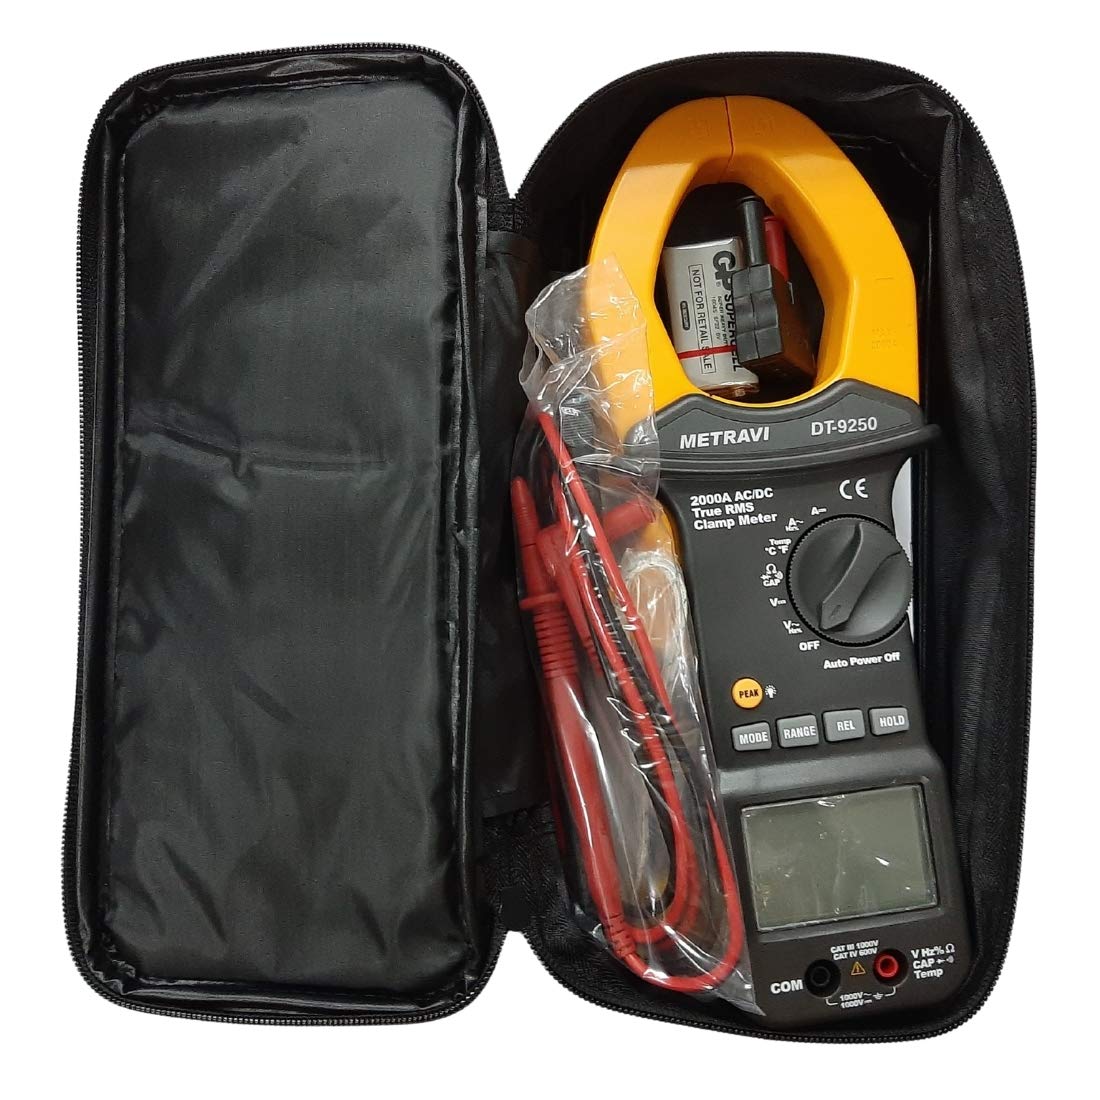 Metravi DT-9250 Big-jaw TRMS AC/DC Clamp Meter 2000A, Fully-protected